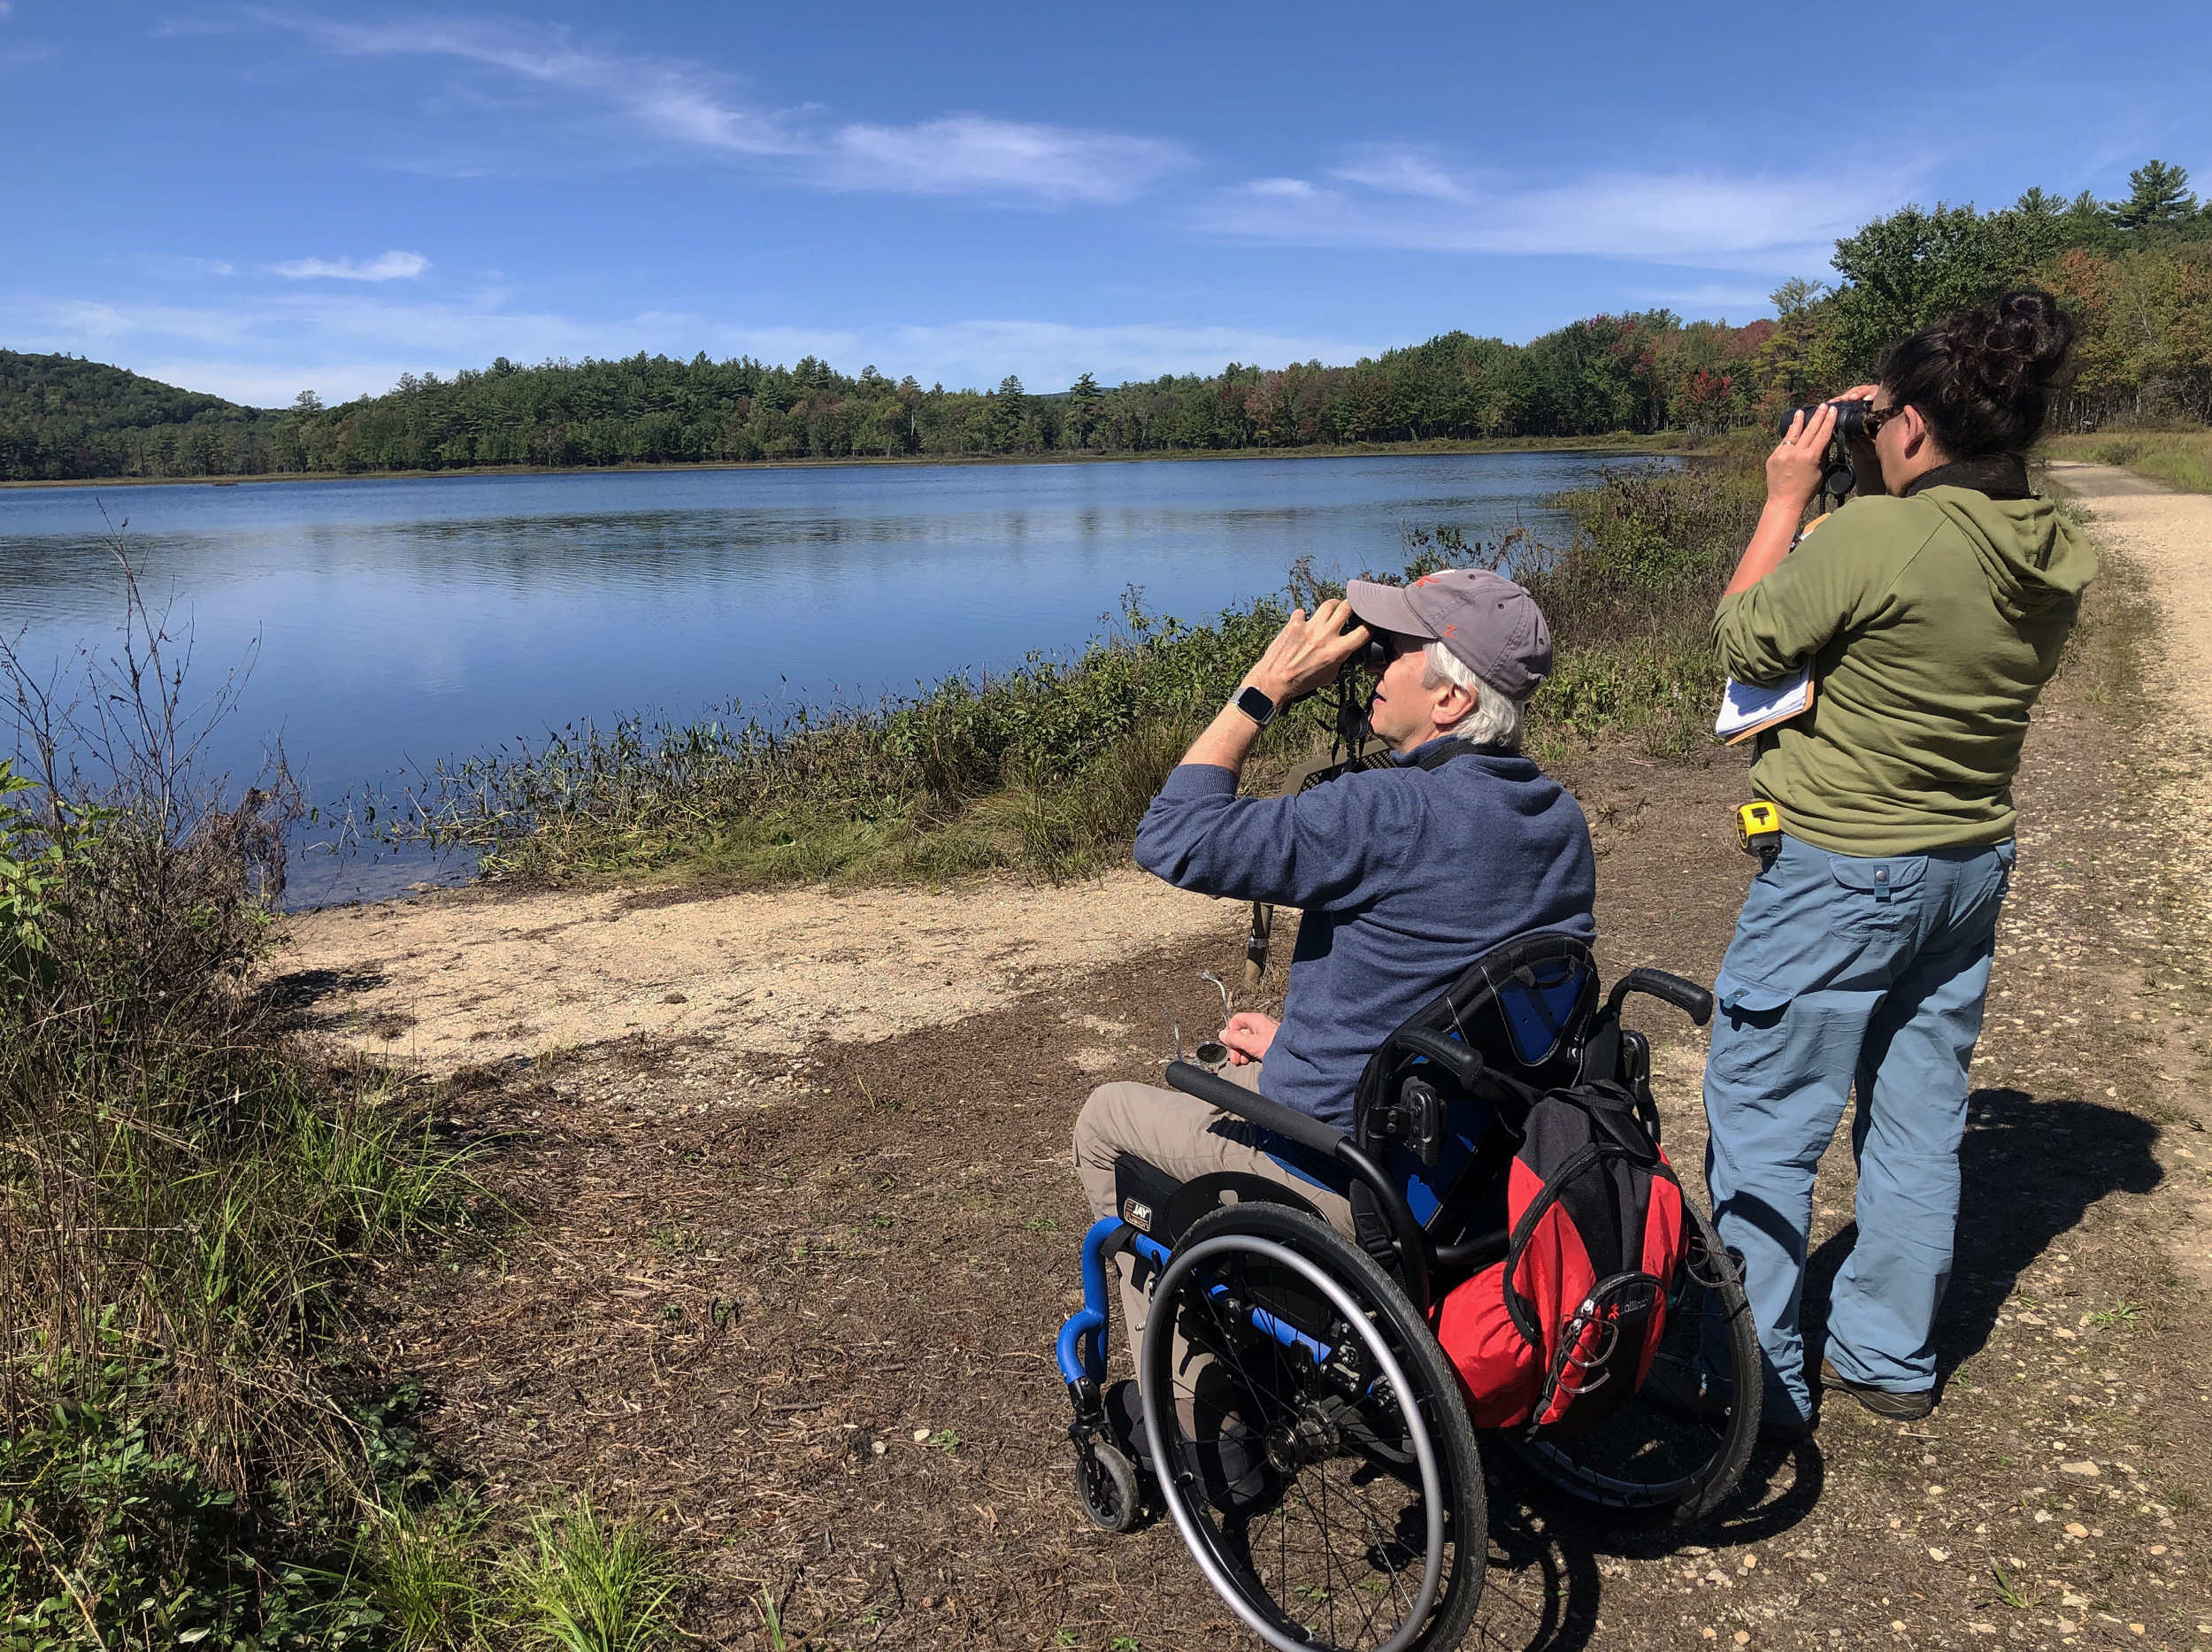 Two people -- one standing, one in a wheelchair -- hold binoculars up to their eyes while birding at a large lake. (photo © Jim Hassinger)